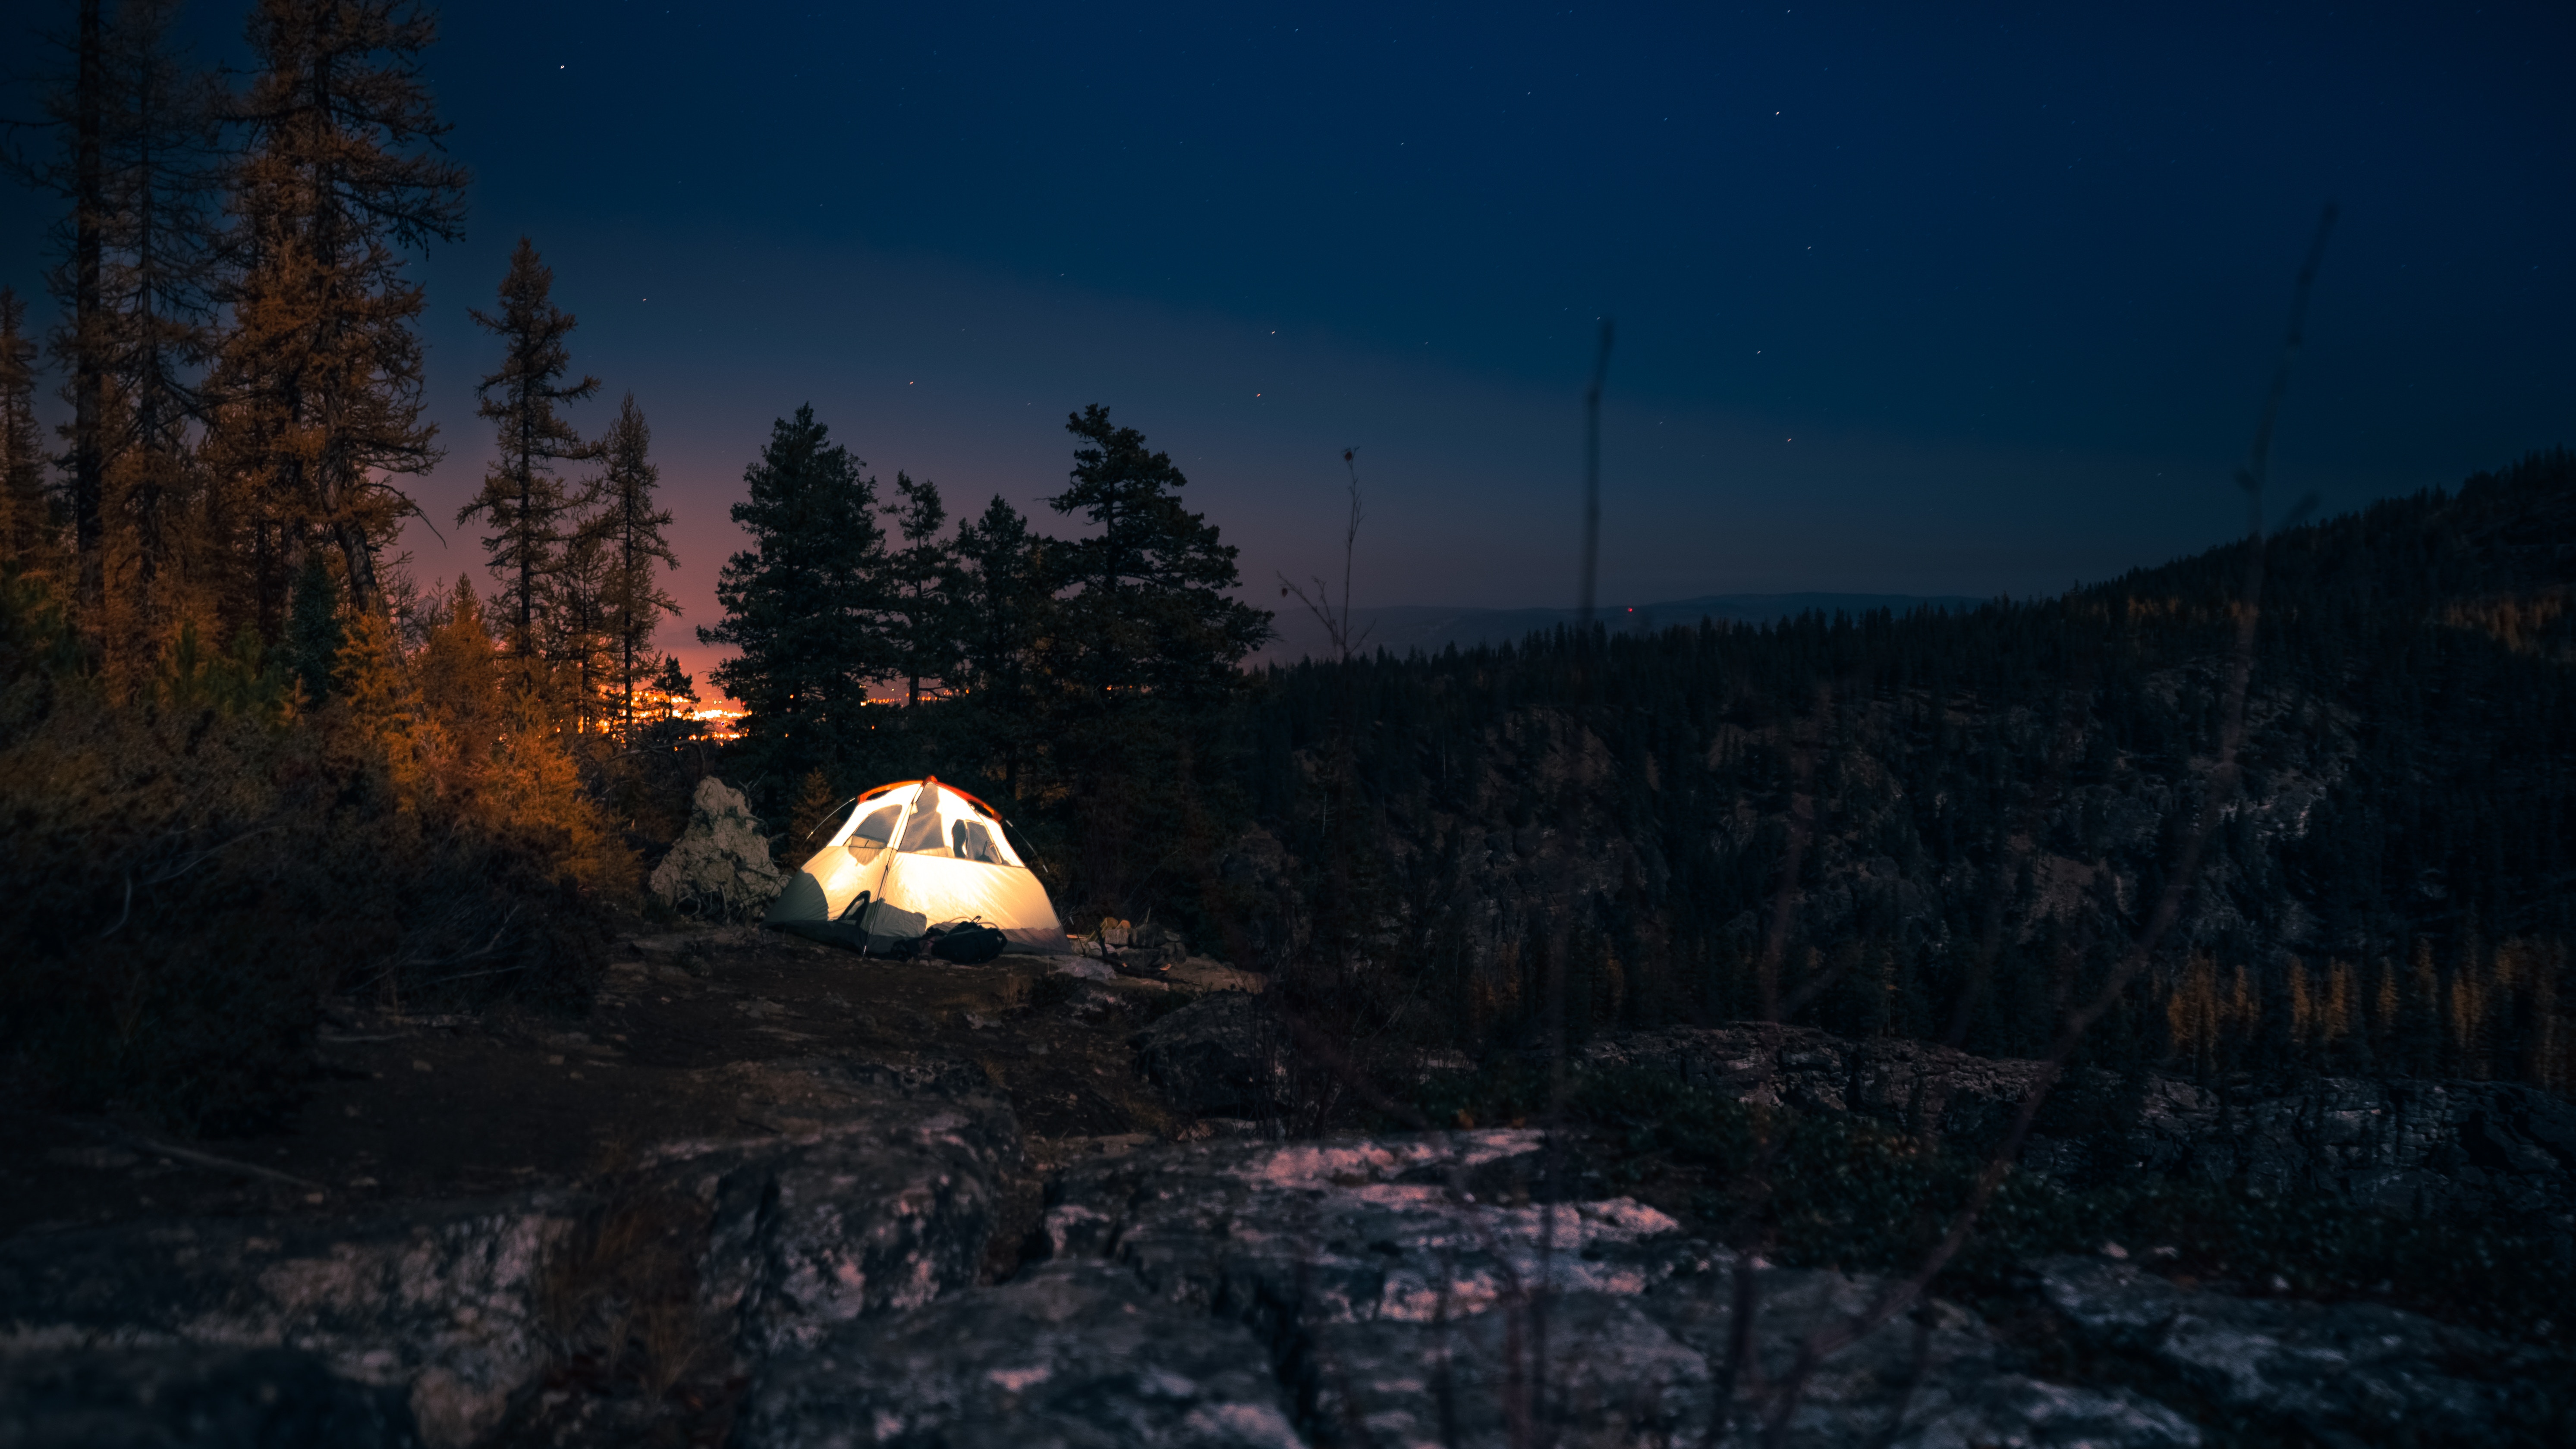 1920x1080 Background dark, night, trees, starry sky, tent, camping, campsite